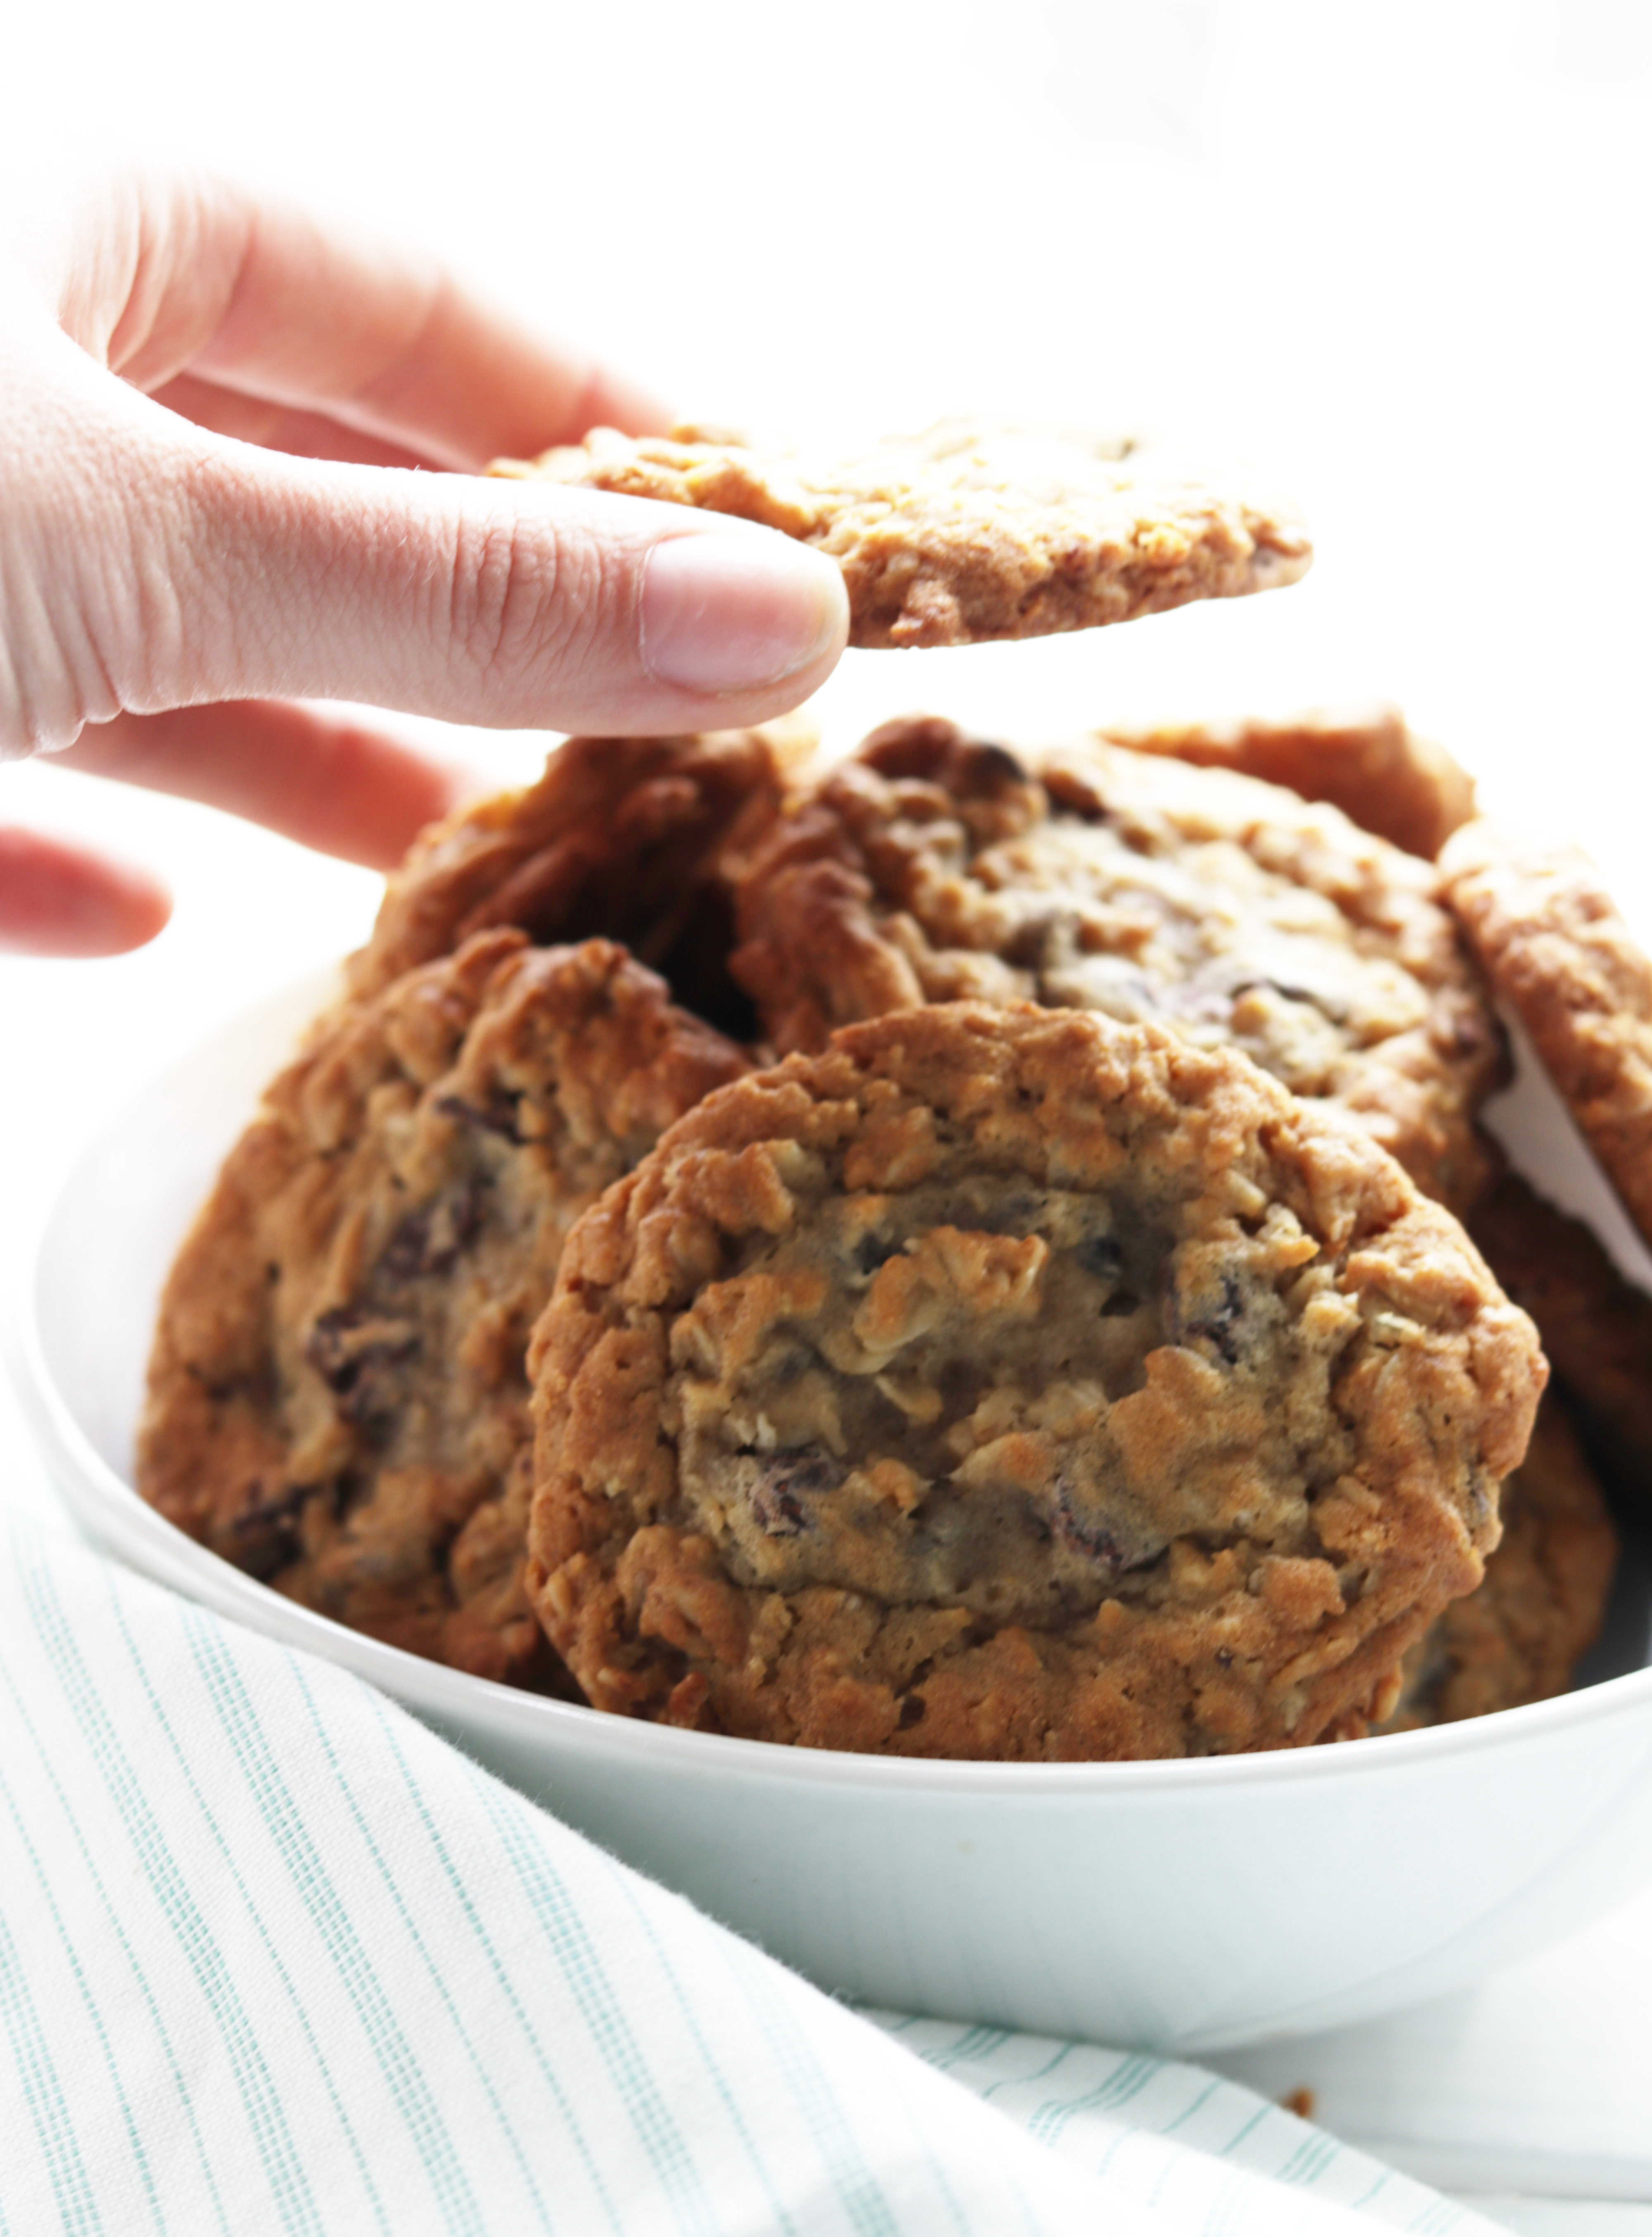 You'll love these soft and chewy chocolate chip oatmeal cookies so much, you might just want to have 2!